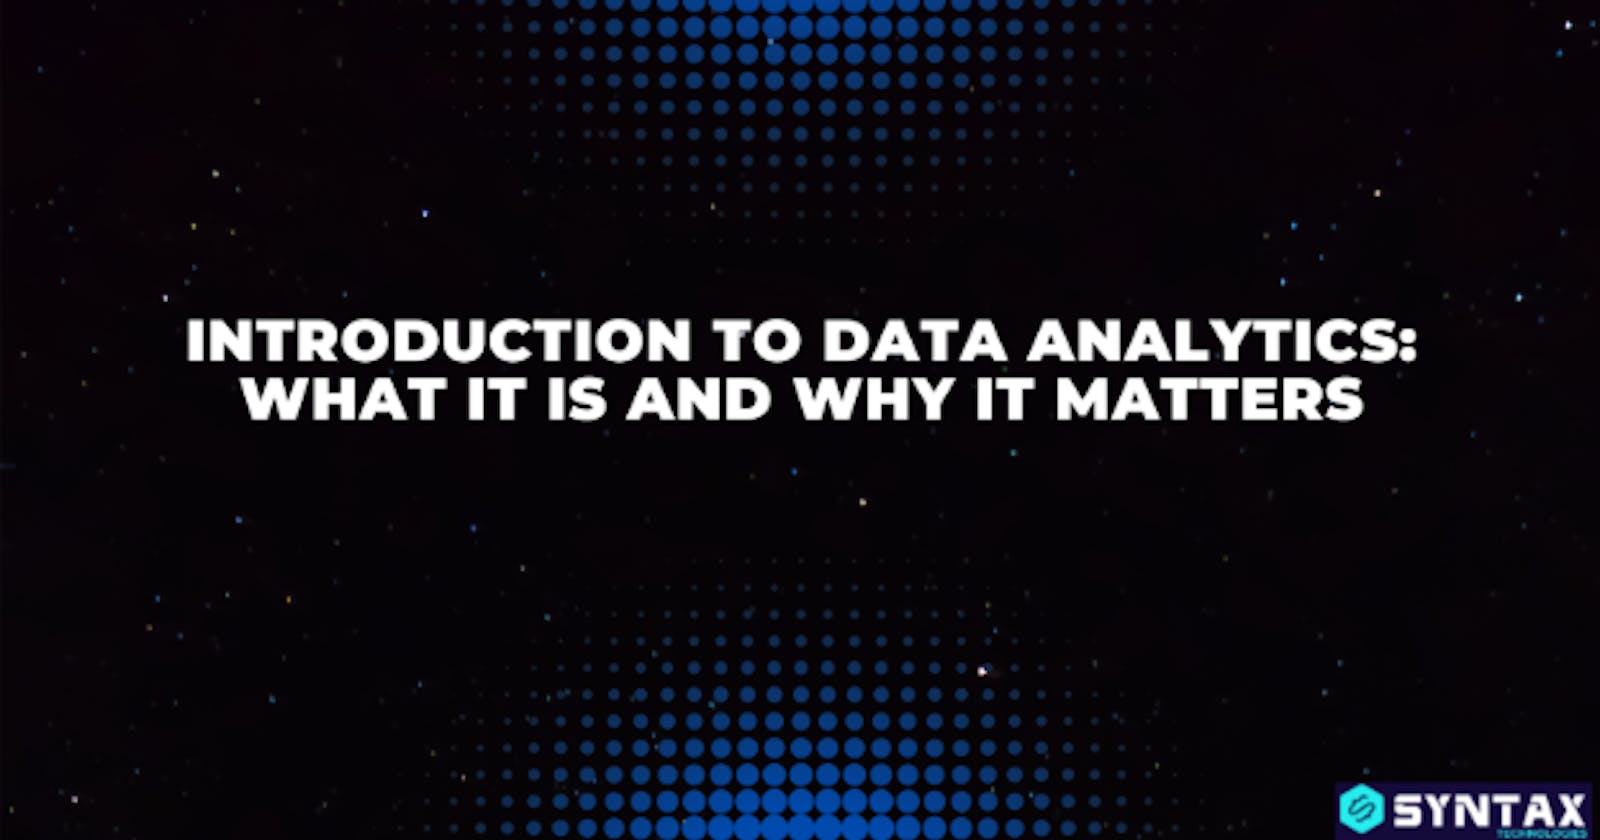 Introduction to Data Analytics: What It Is and Why It Matters